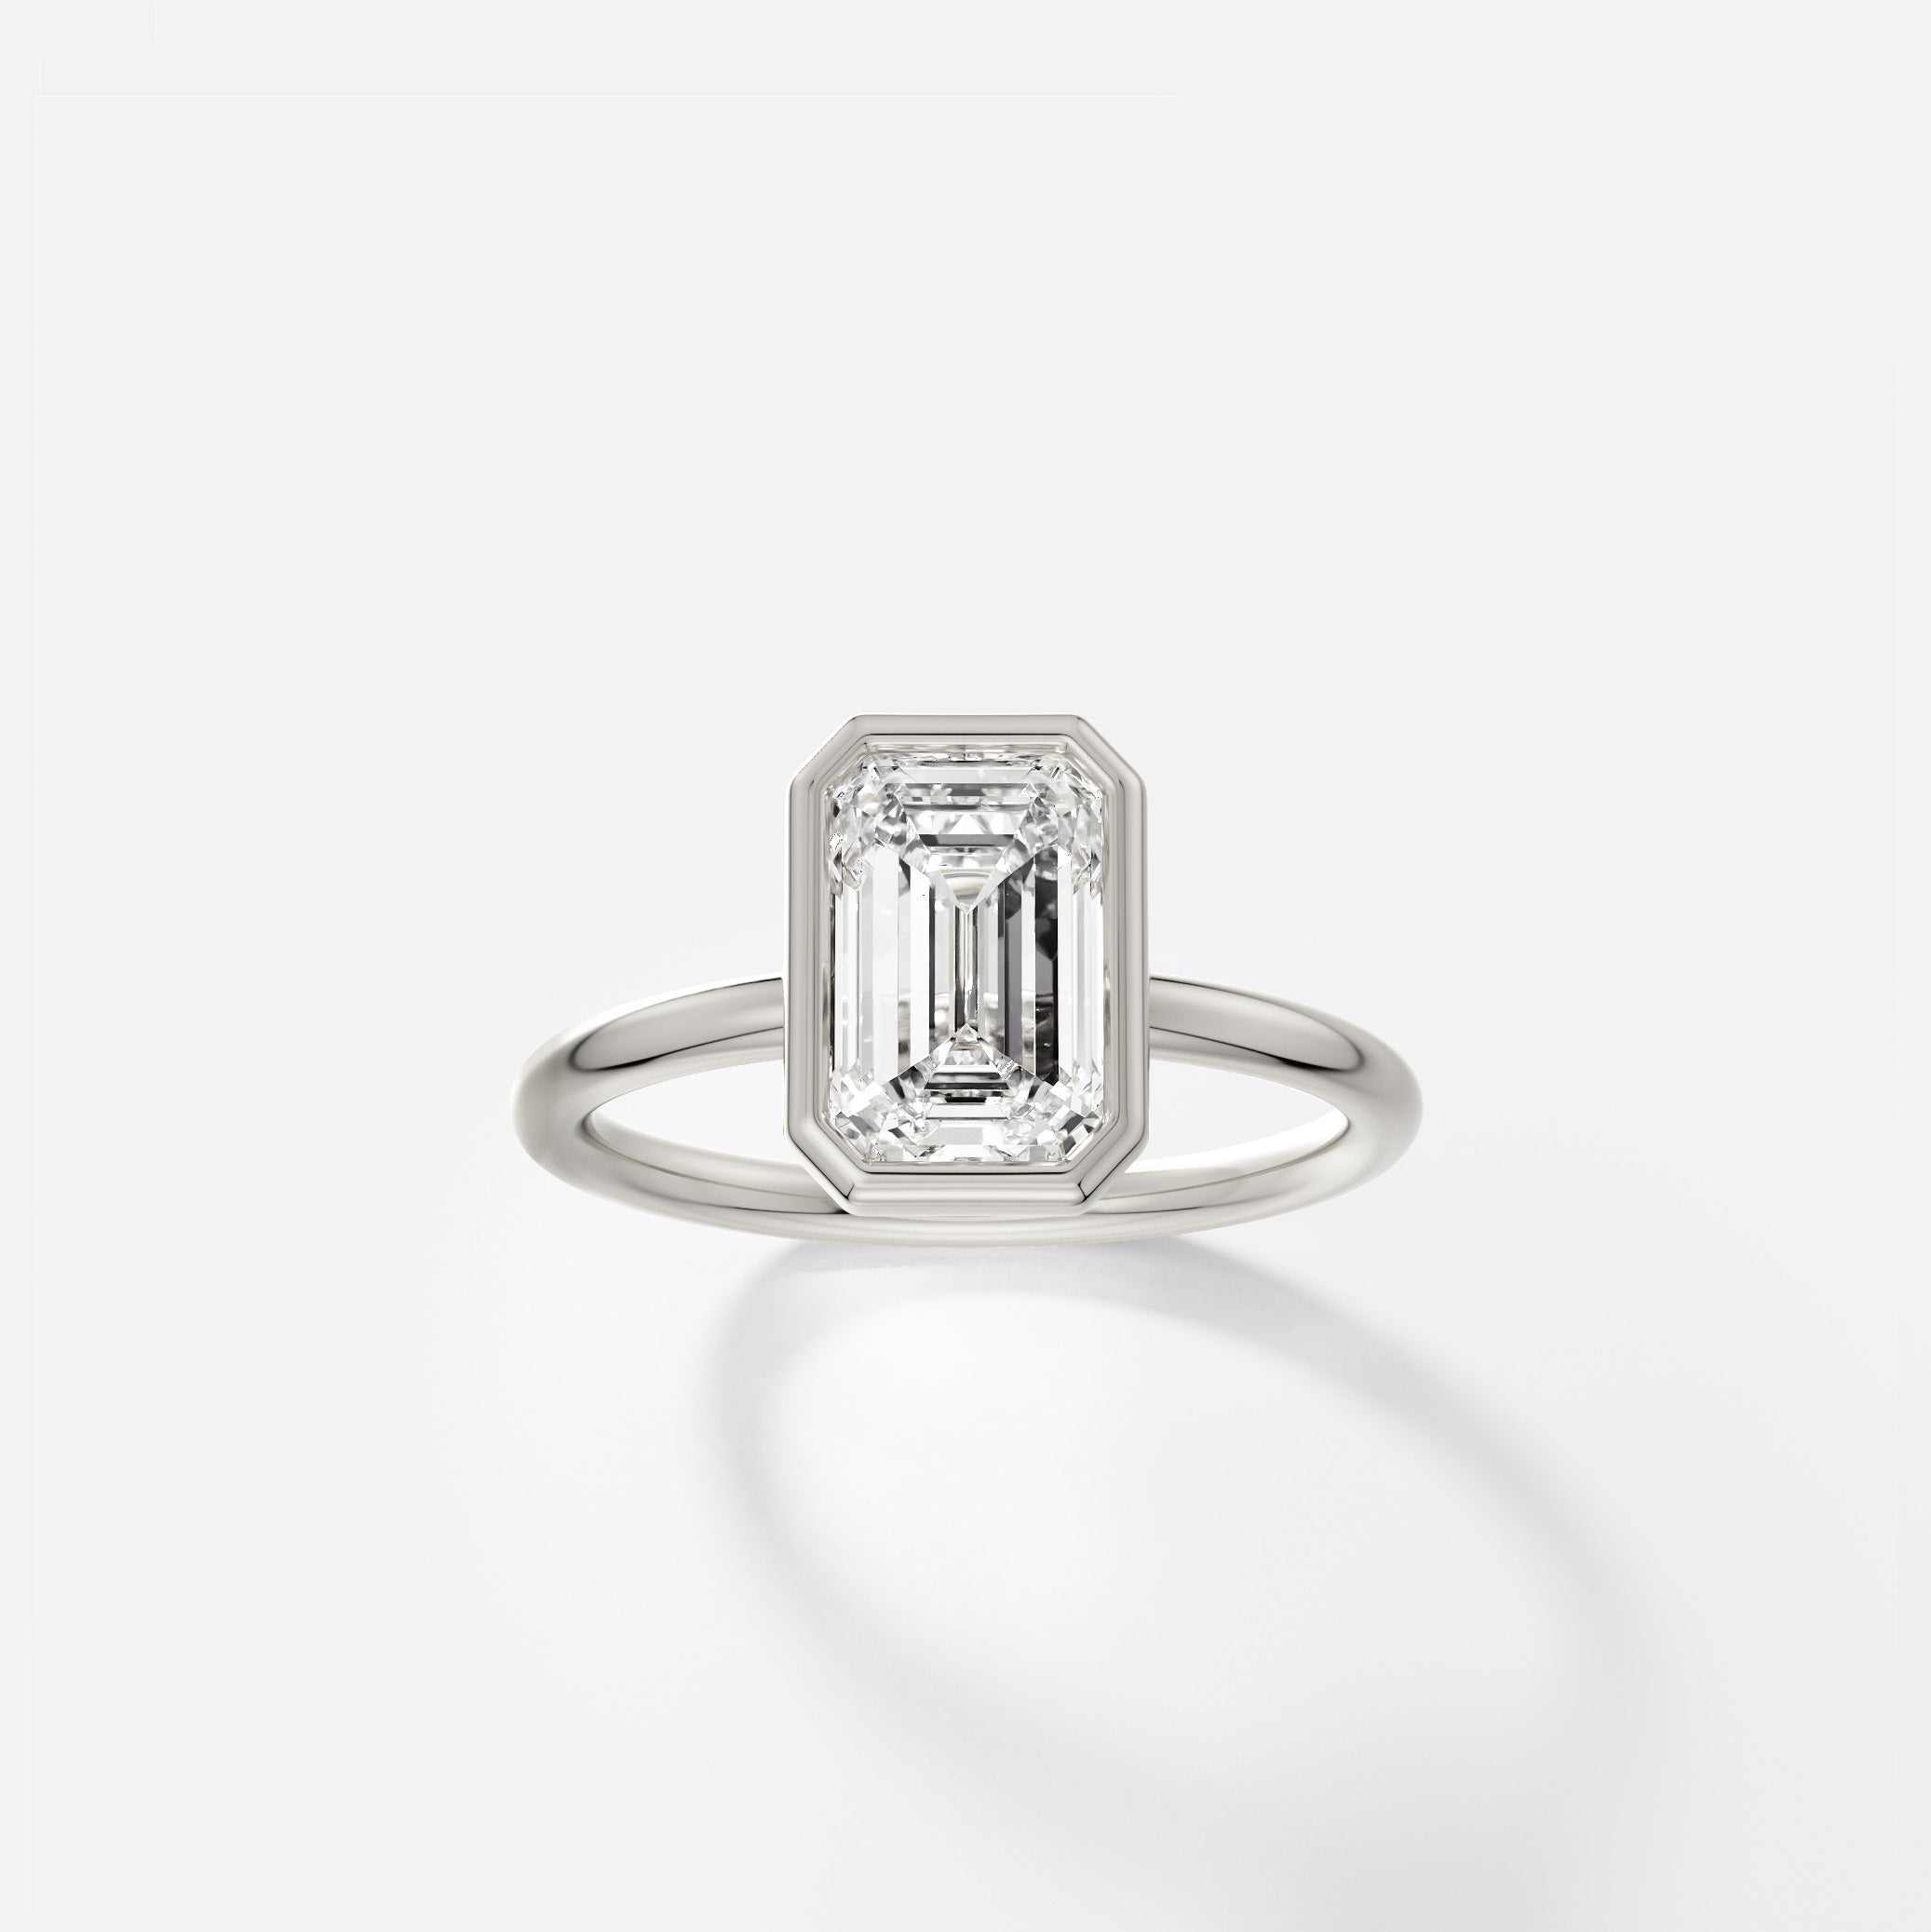 ARTI thin round band with North South Emerald Cut Profile Bezel Set Simple Diamond Gemstone Engagement Ring Setting in recycled 14k Gold or platinum by SHW Fine Jewelry New York City